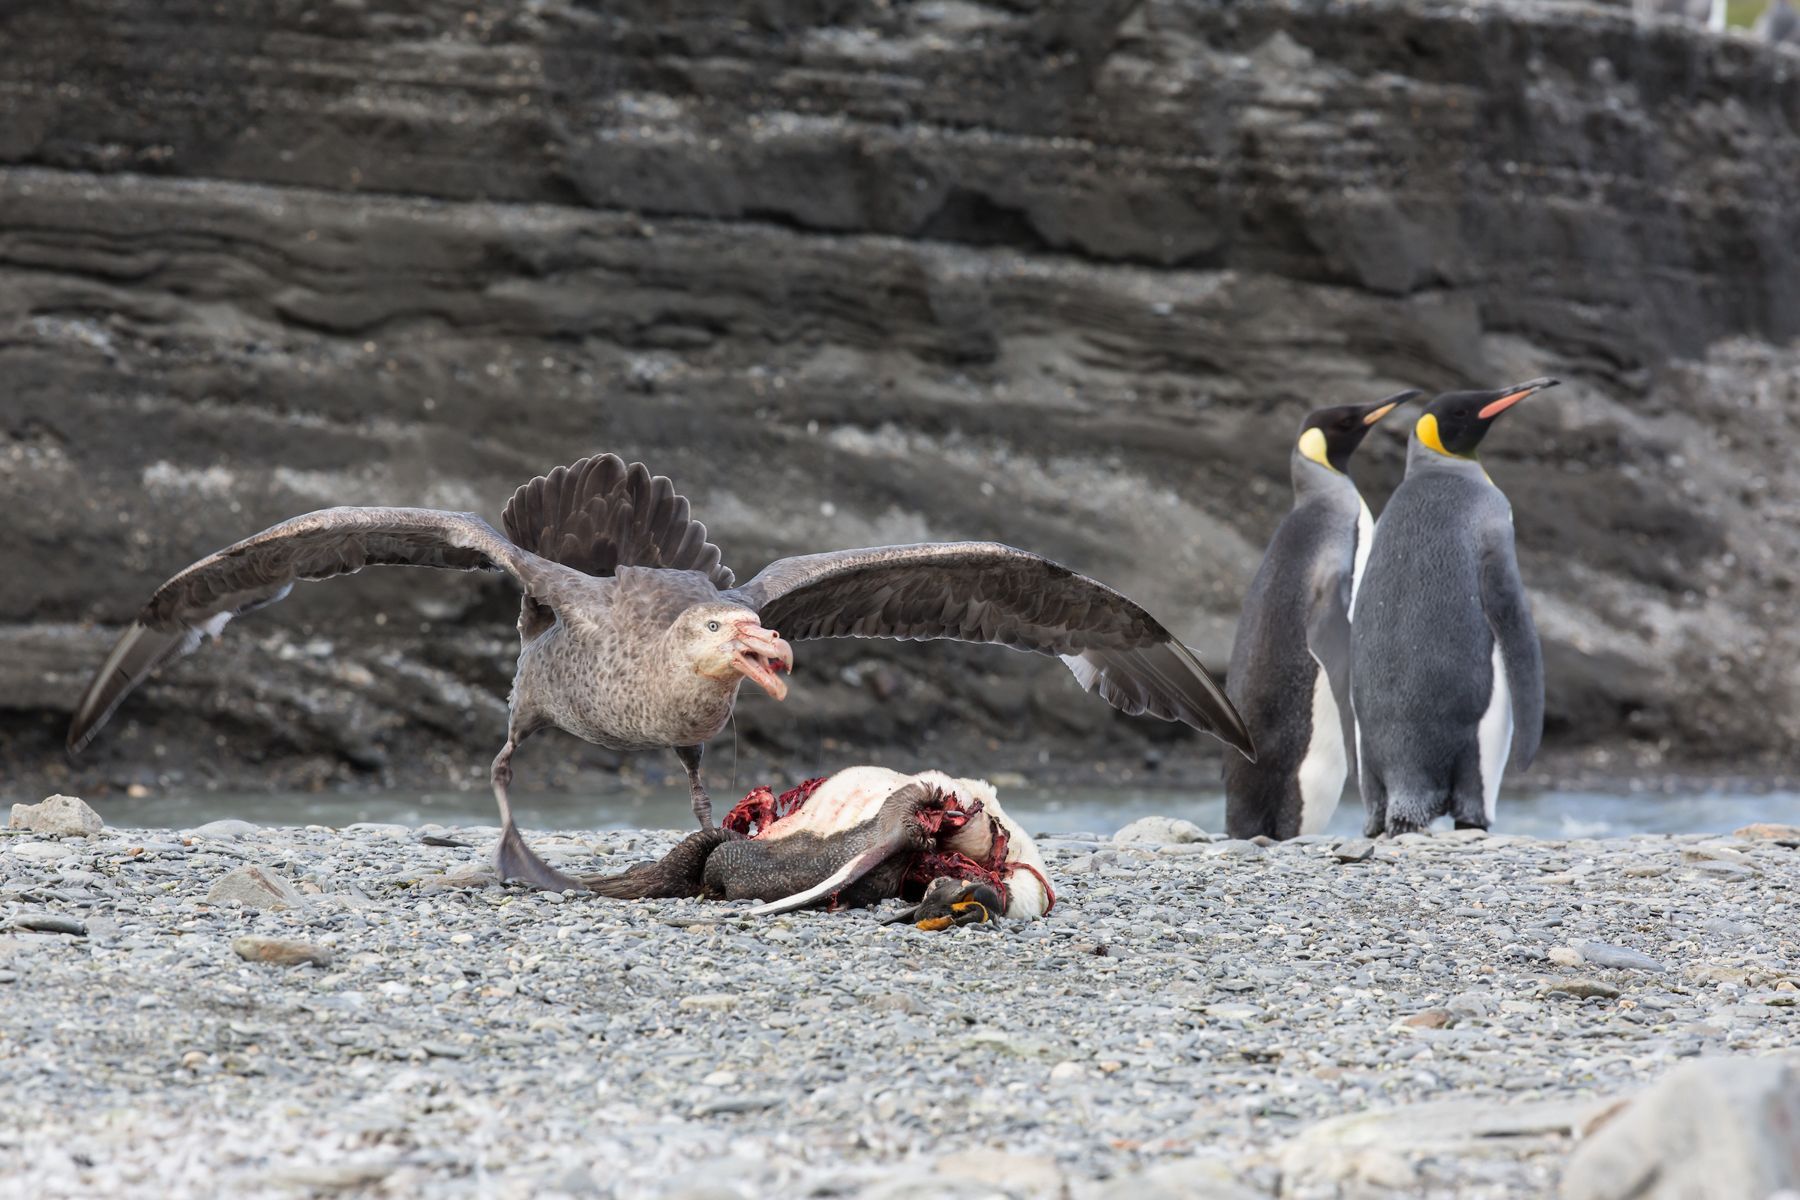 A Southern Giant Petrel devours the carcass of a King Penguin while macabrely two other penguins watch